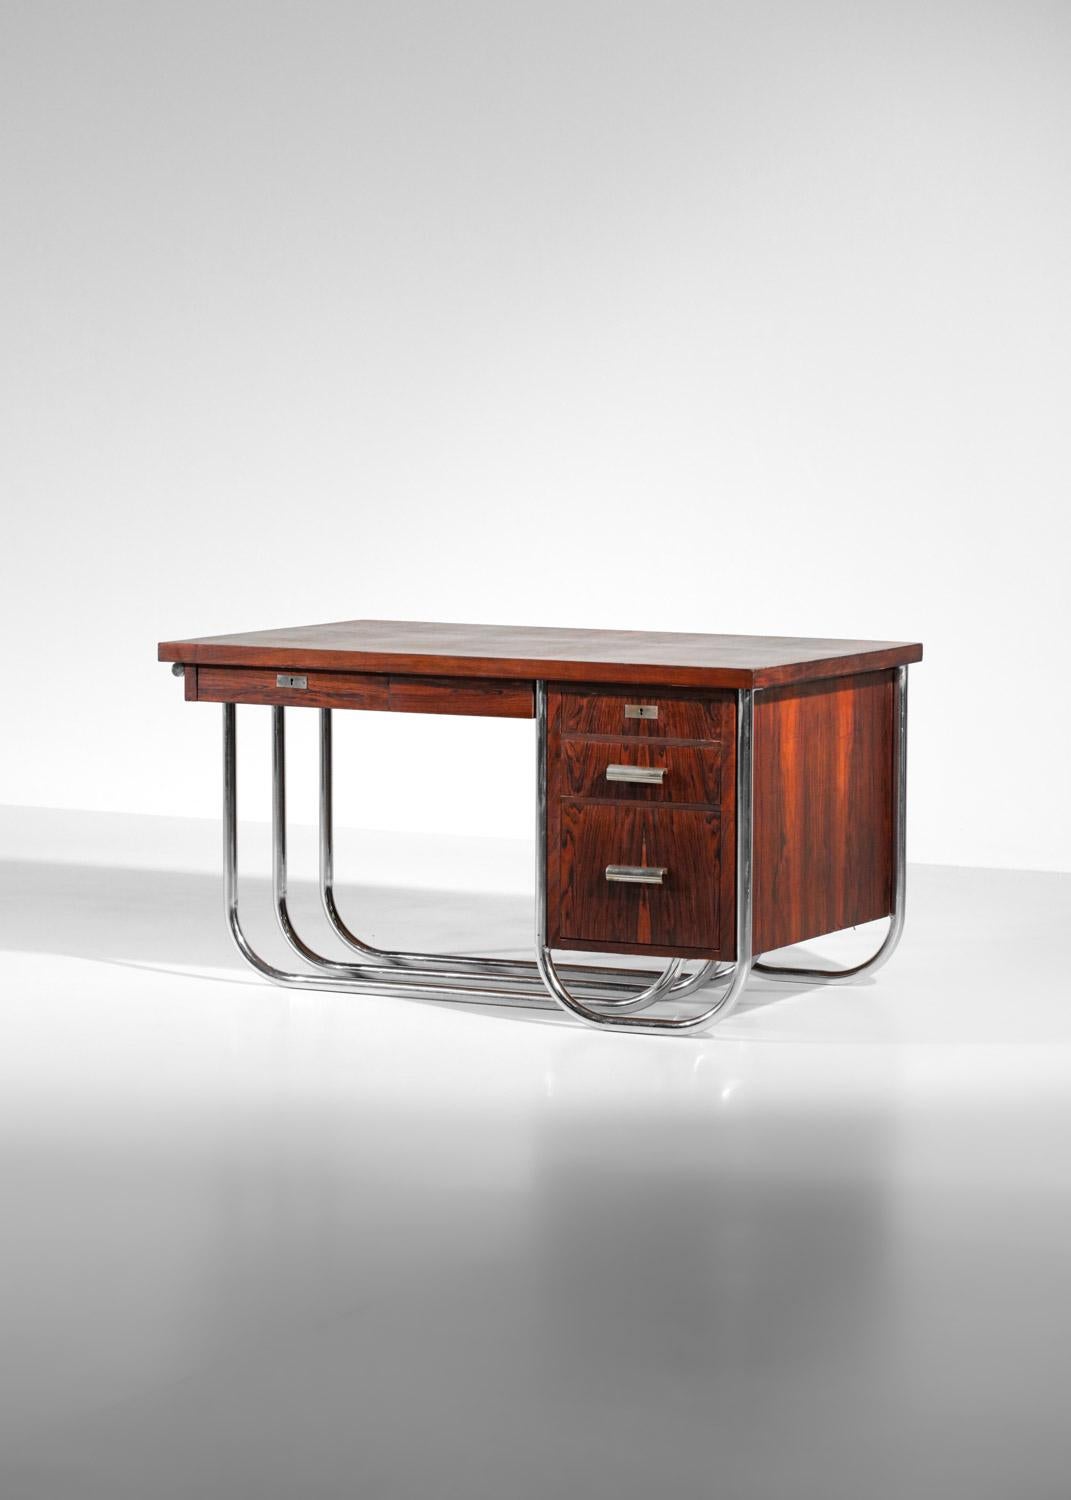 Modernist Desk in Solid Wood 40s / 50s Bauhaus Style Vintage In Good Condition For Sale In Lyon, FR